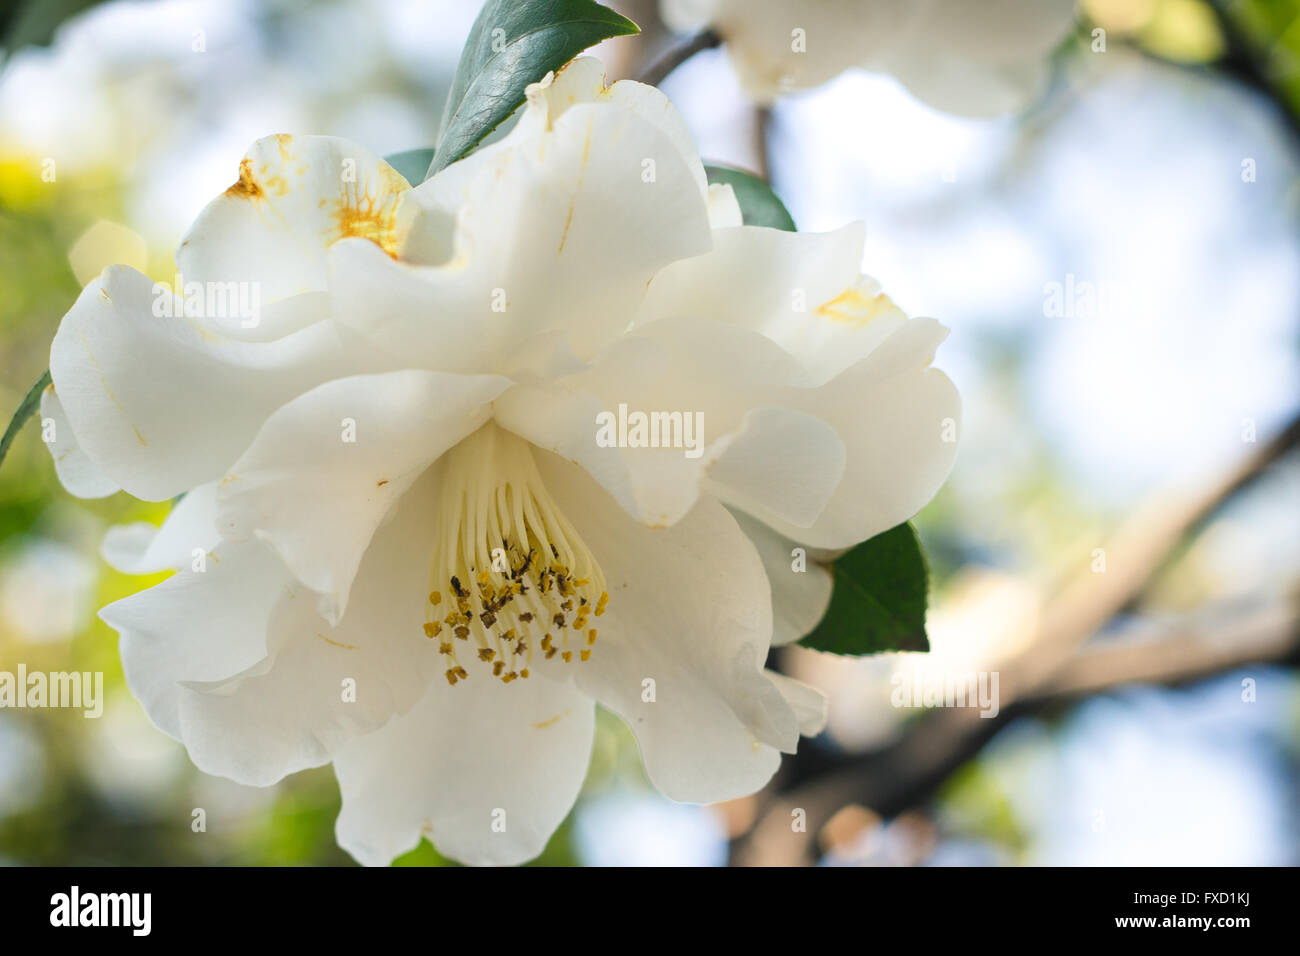 Close up selective focus of a white camellia flower. Stock Photo